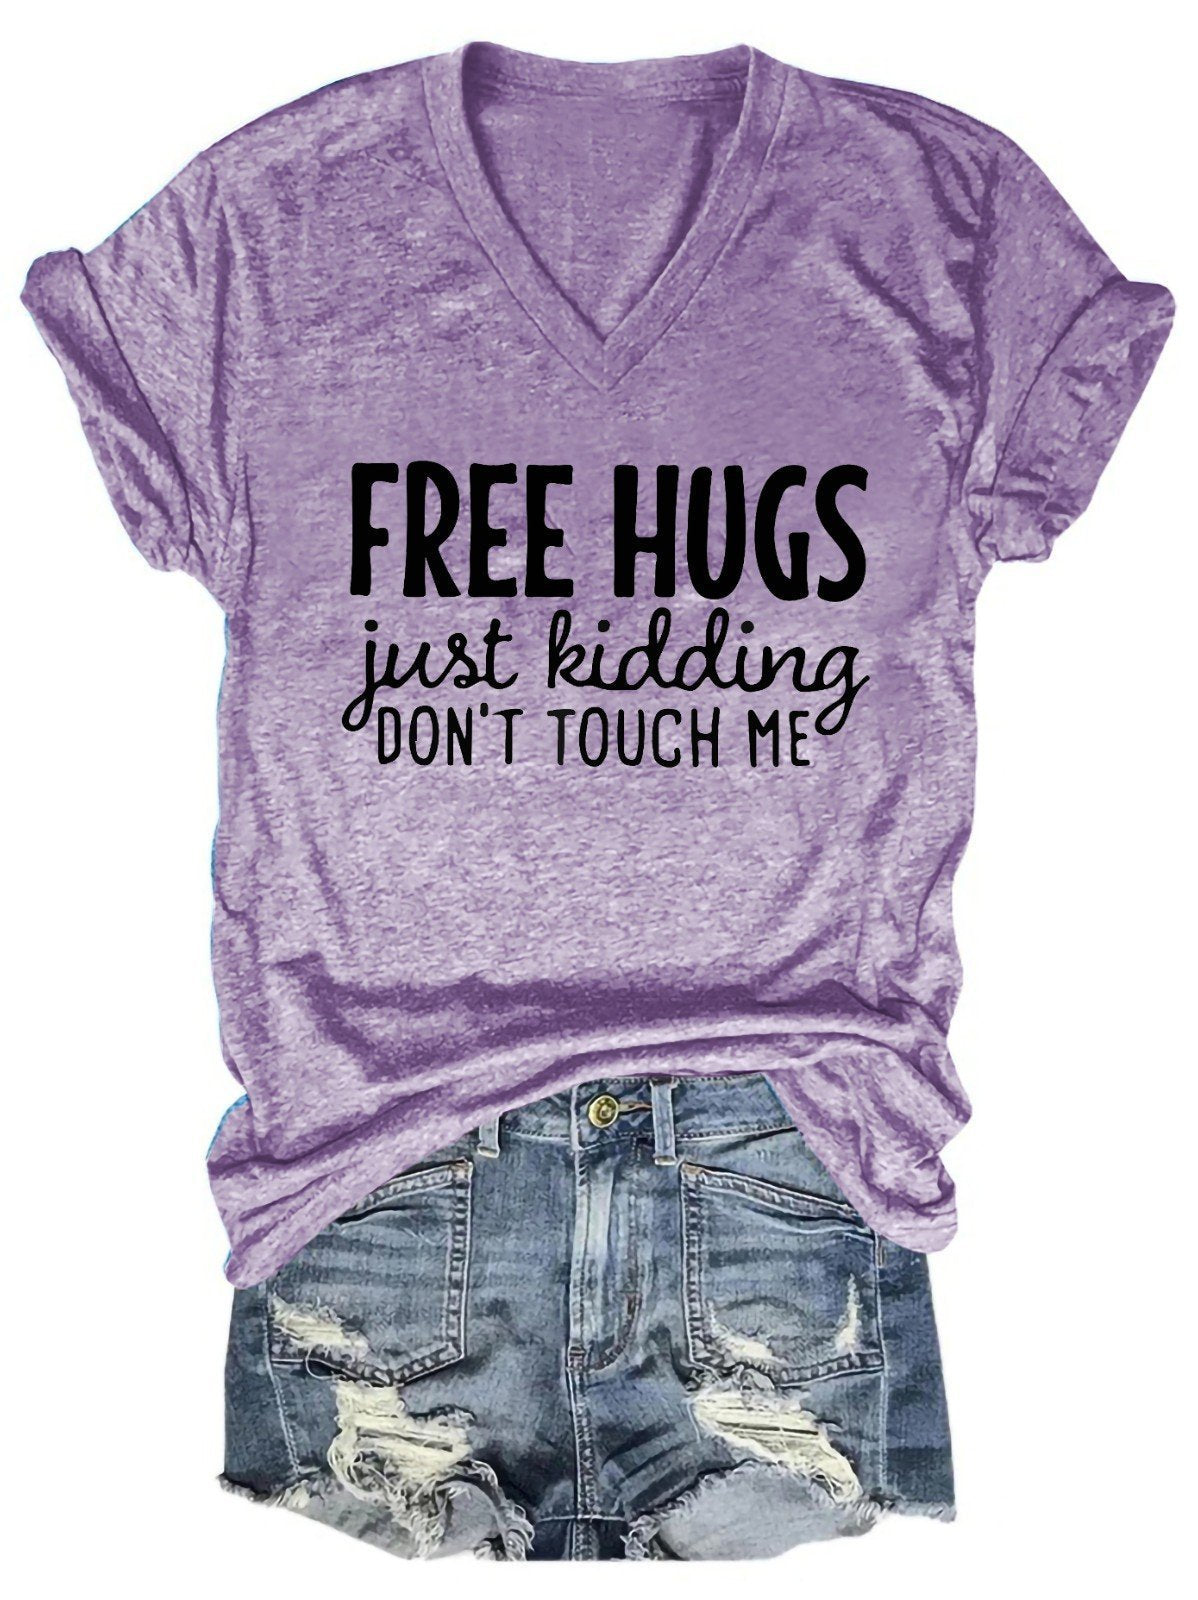 Free Hugs Just Kidding Don't Touch Me Women's V-Neck T-Shirt - Outlets Forever